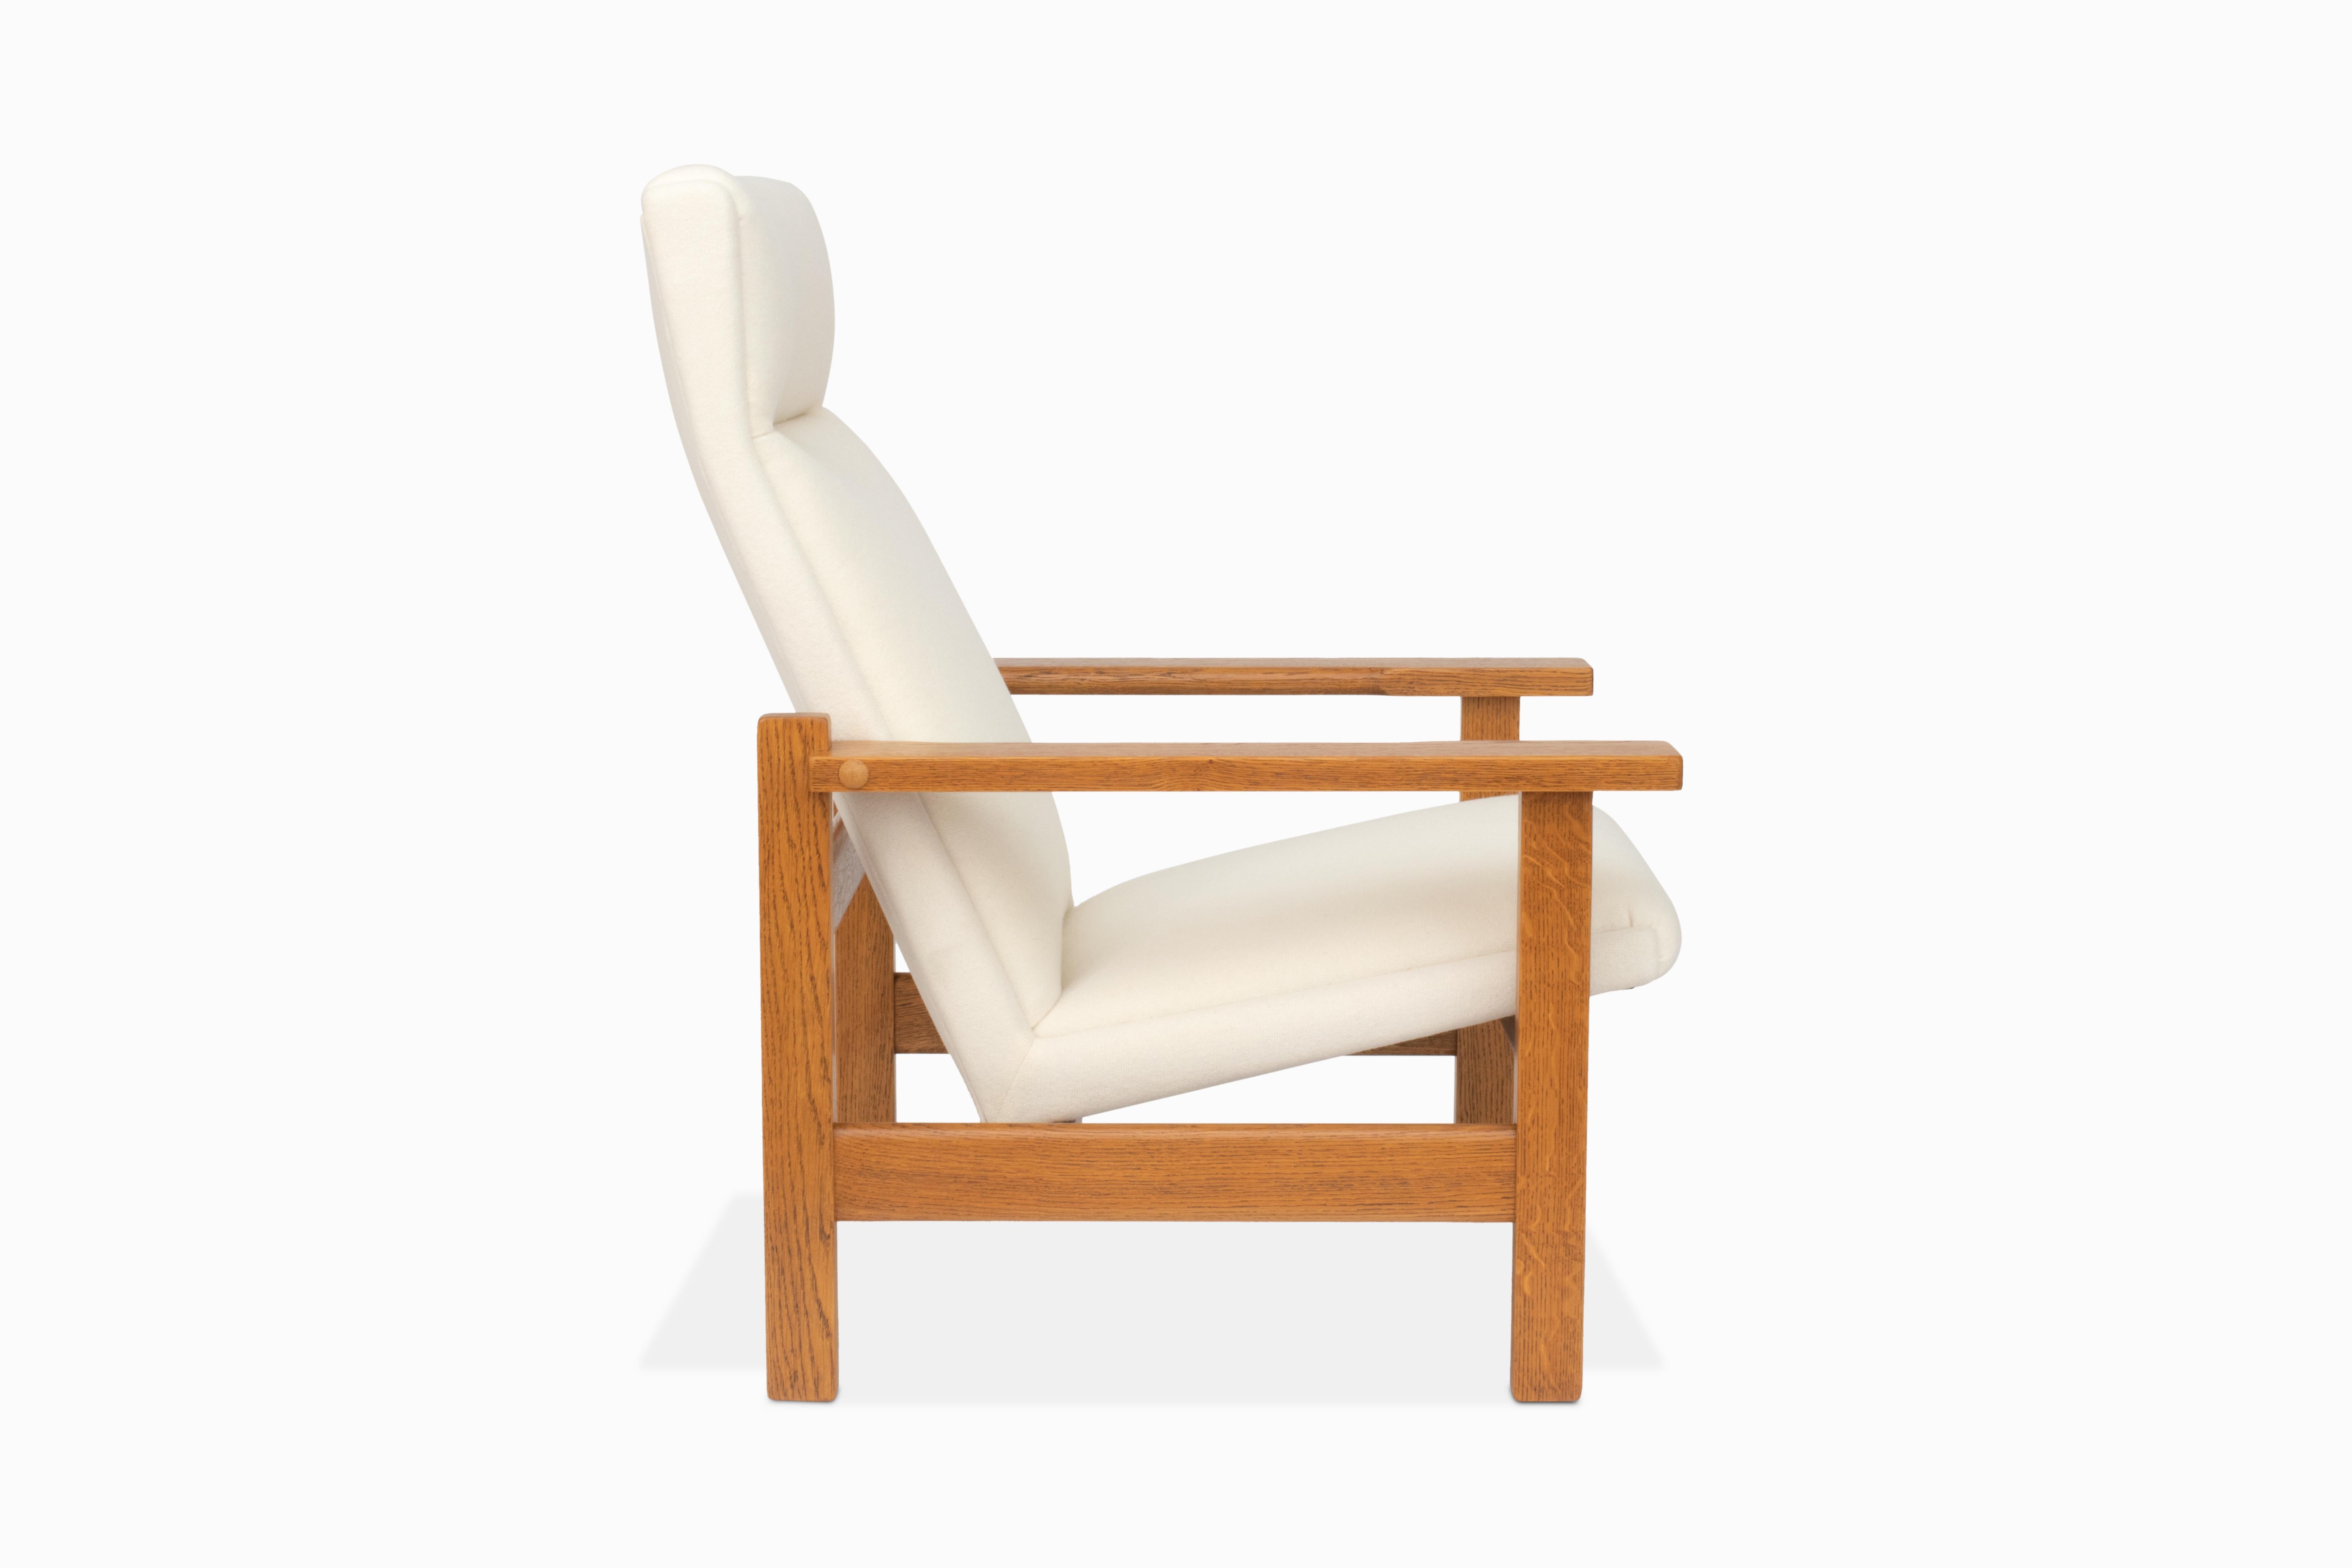 Pair of Getama GE-163a Oak Lounge Chairs by Hans Wegner In Good Condition For Sale In Oxnard, CA